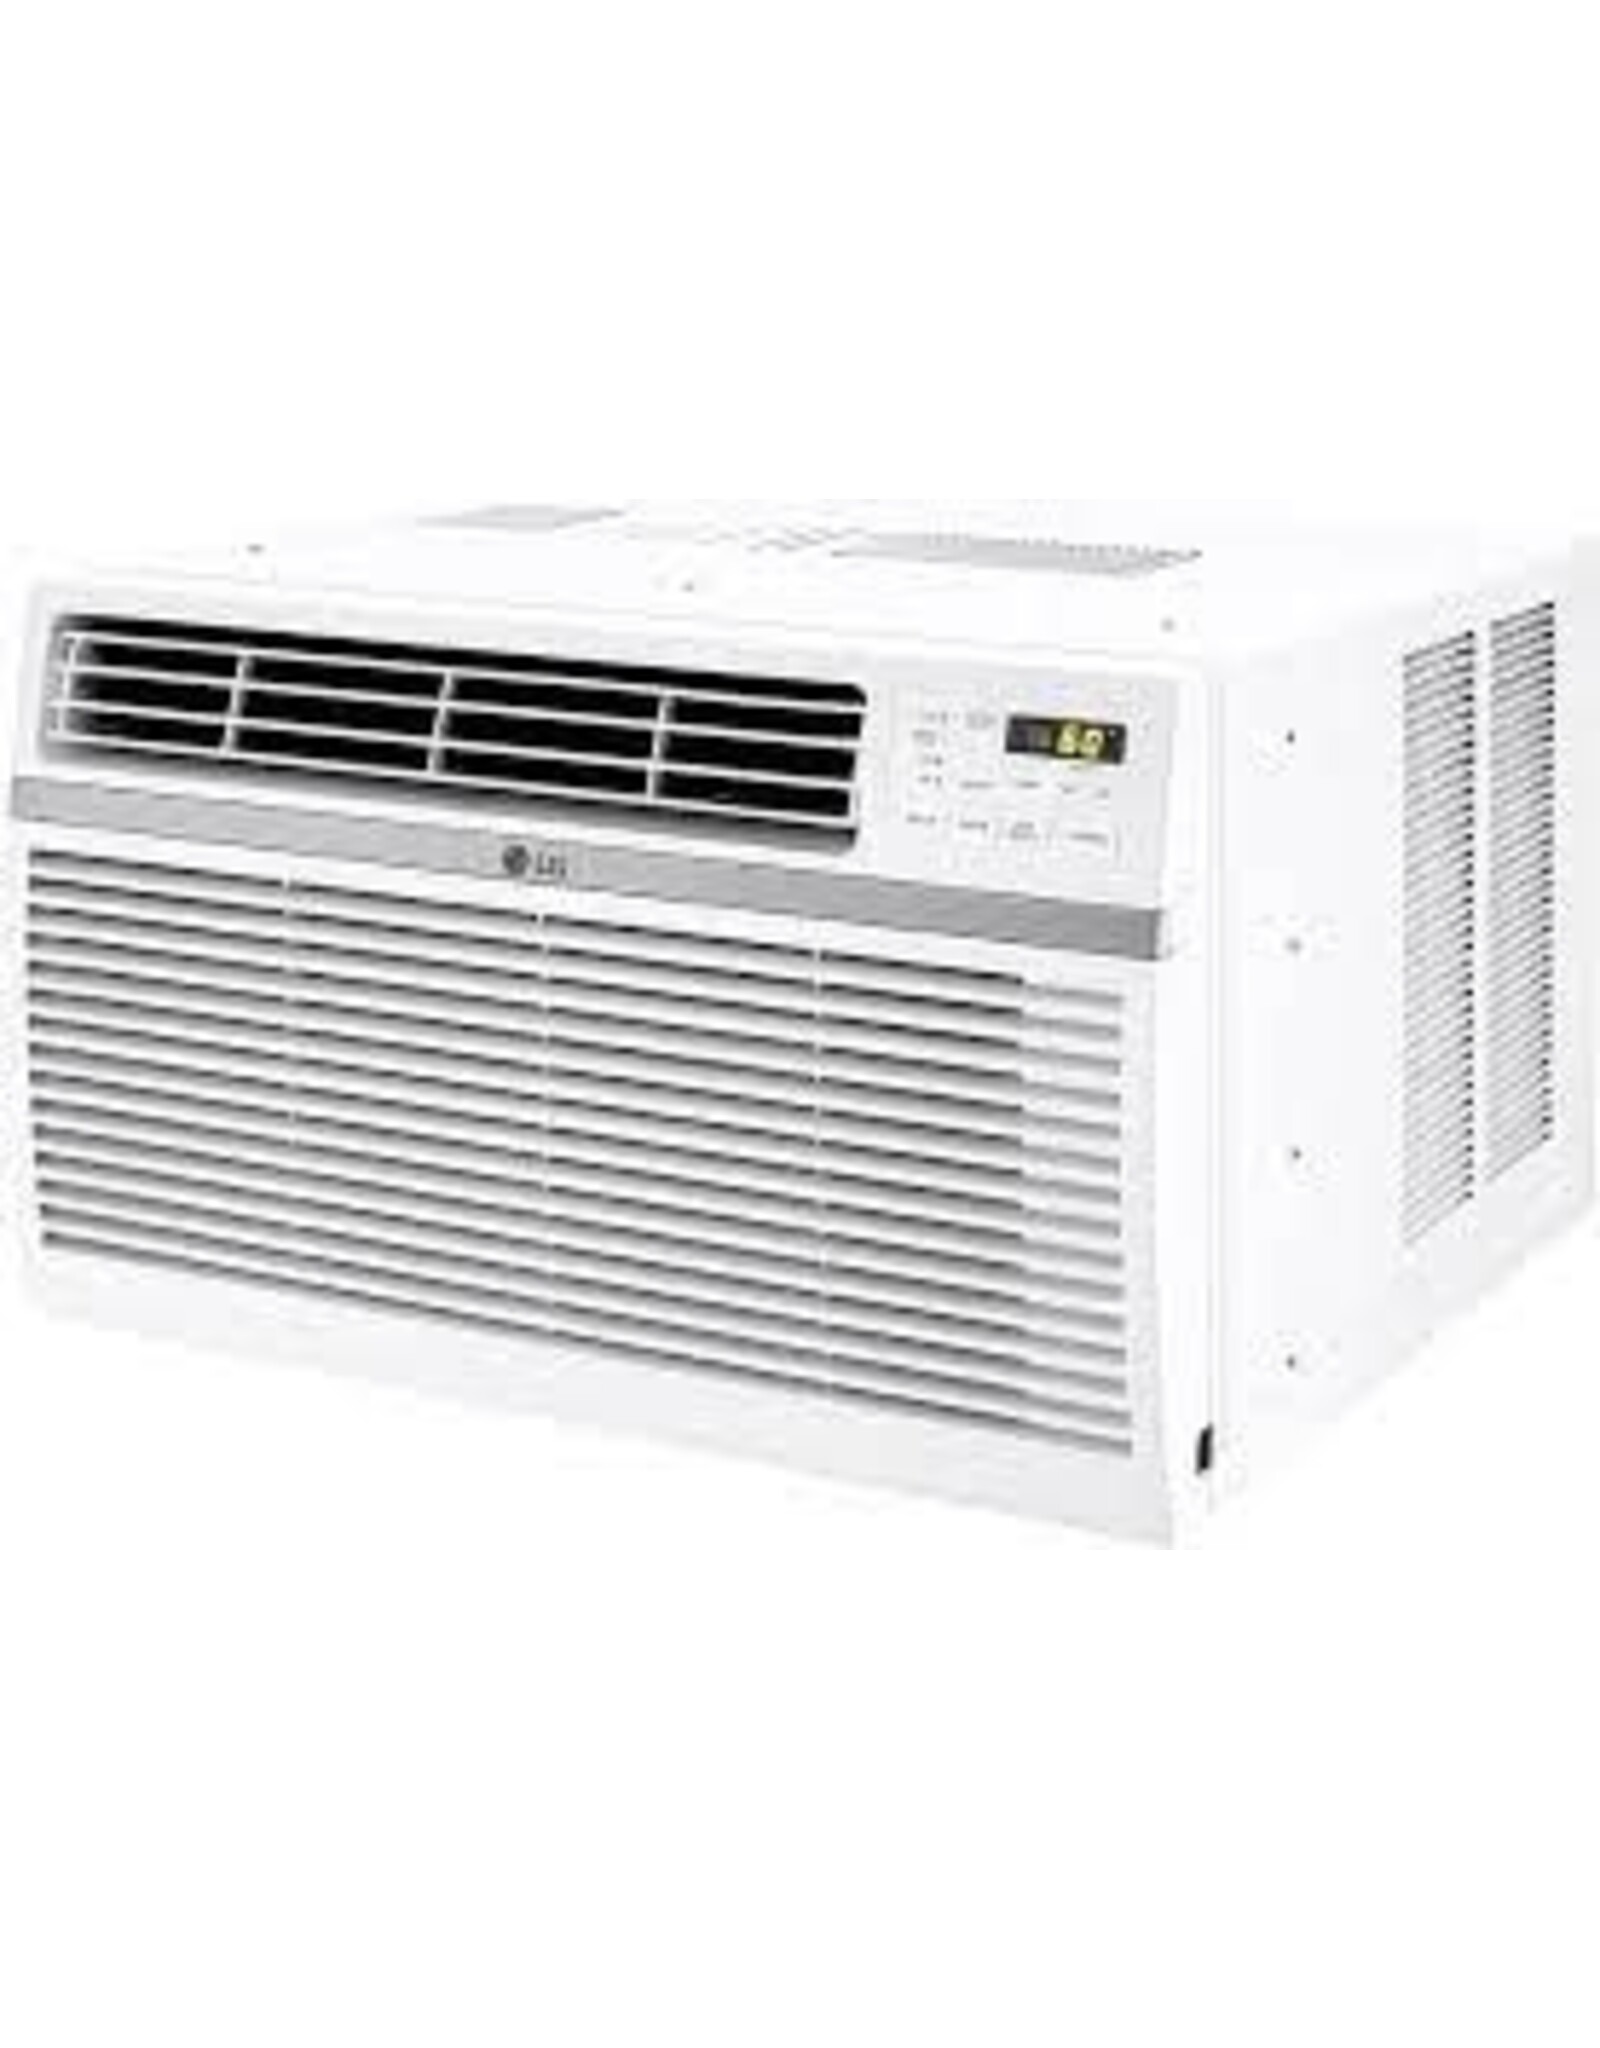 lg LG 12,000 BTU 115-Volt Window Air Conditioner LW1216ER Cools 550 Sq. Ft. with ENERGY STAR and Remote